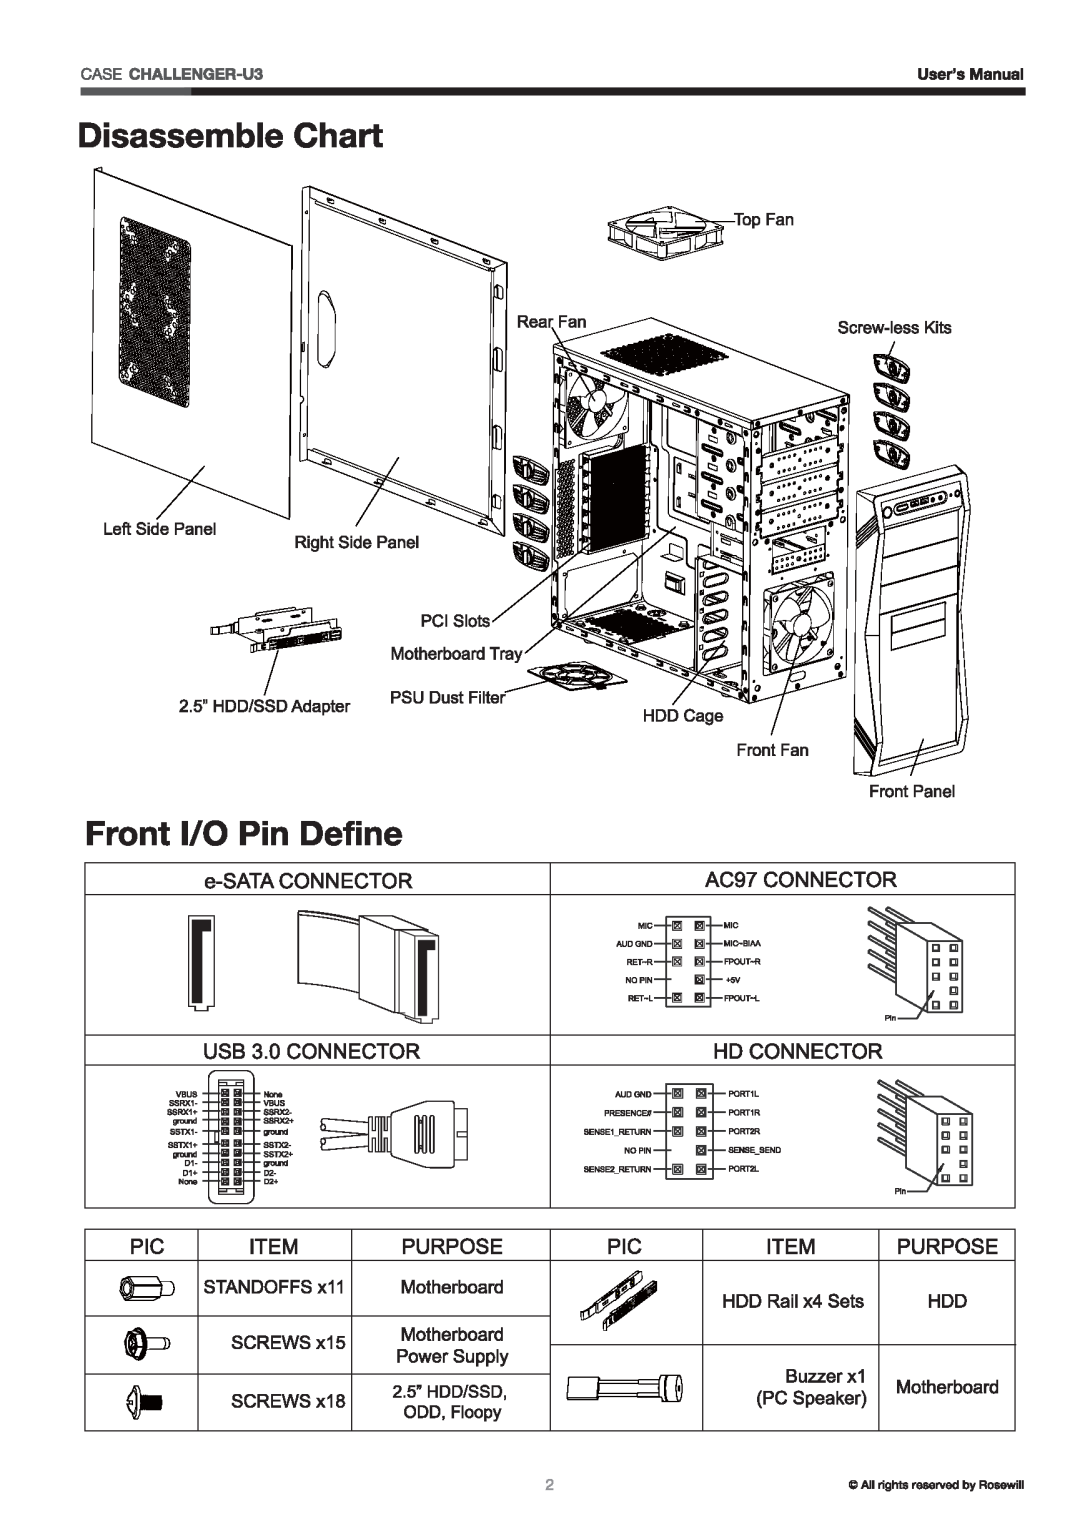 Rosewill CHALLENGER manual 